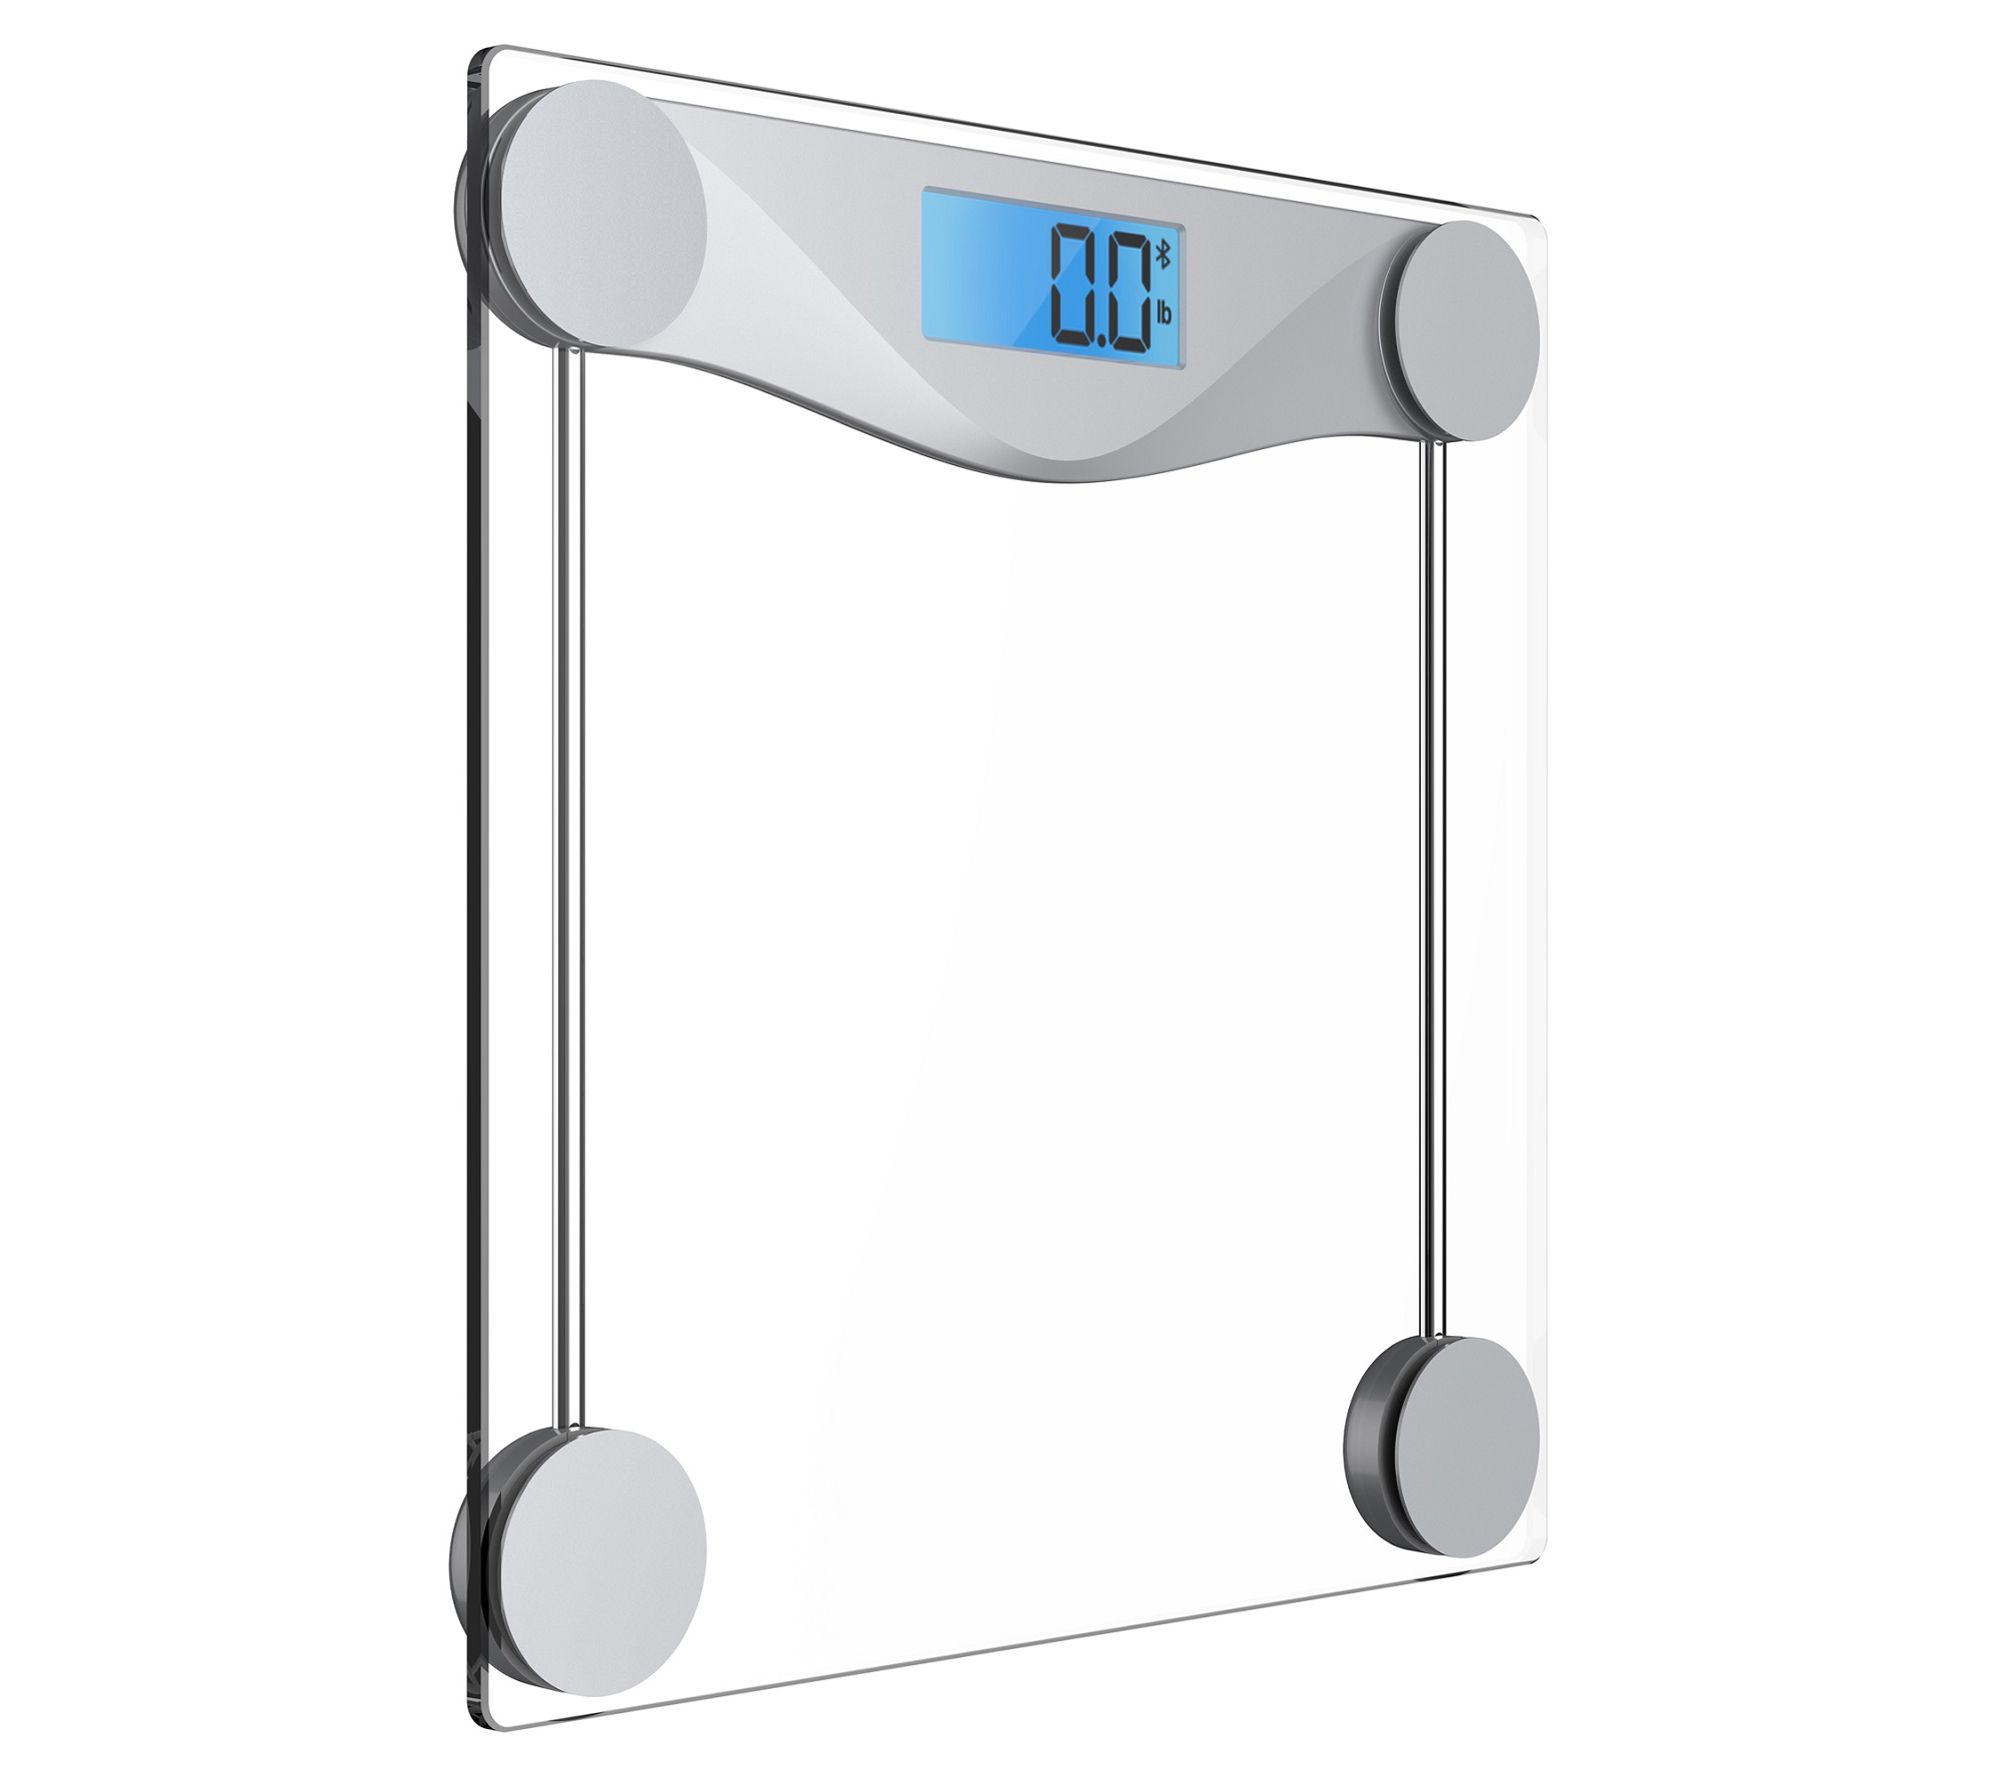 How To Calibrate a Bathroom Scale 